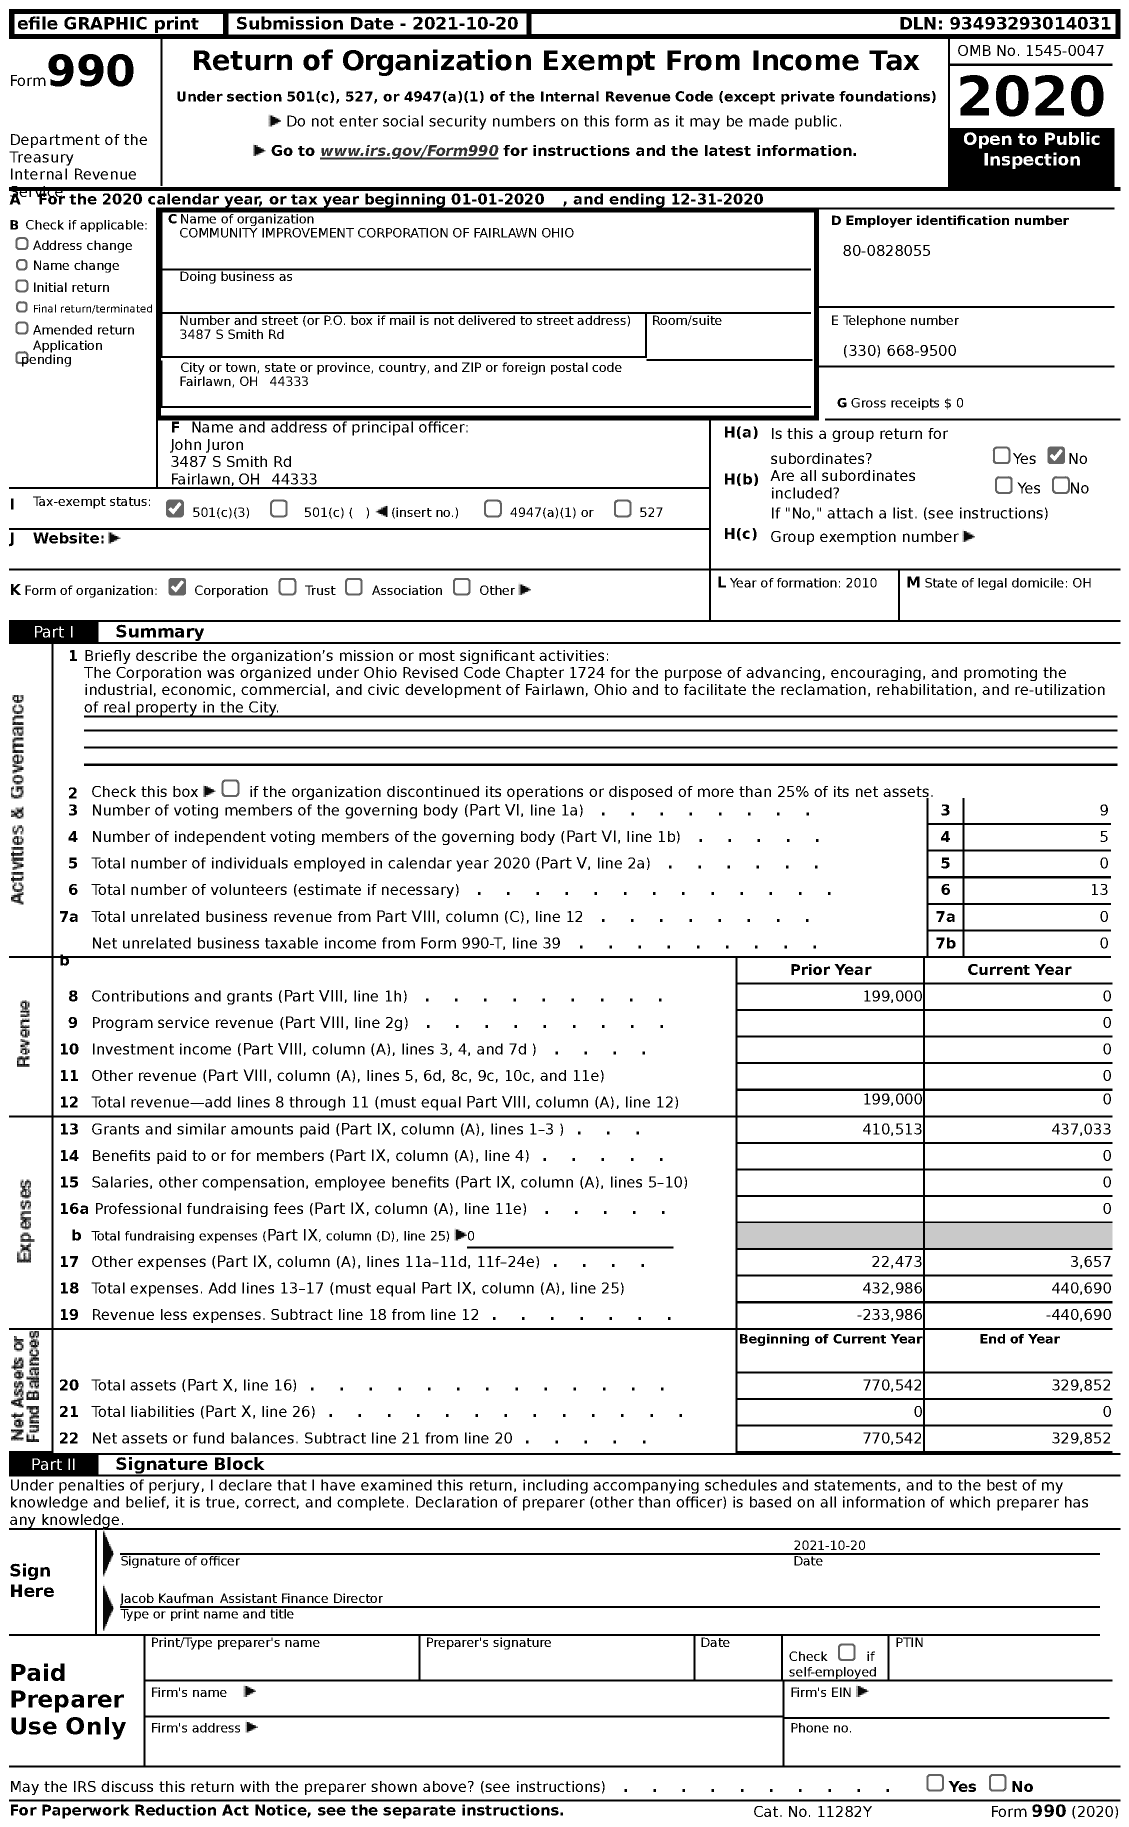 Image of first page of 2020 Form 990 for Community Improvement Corporation of Fairlawn Ohio